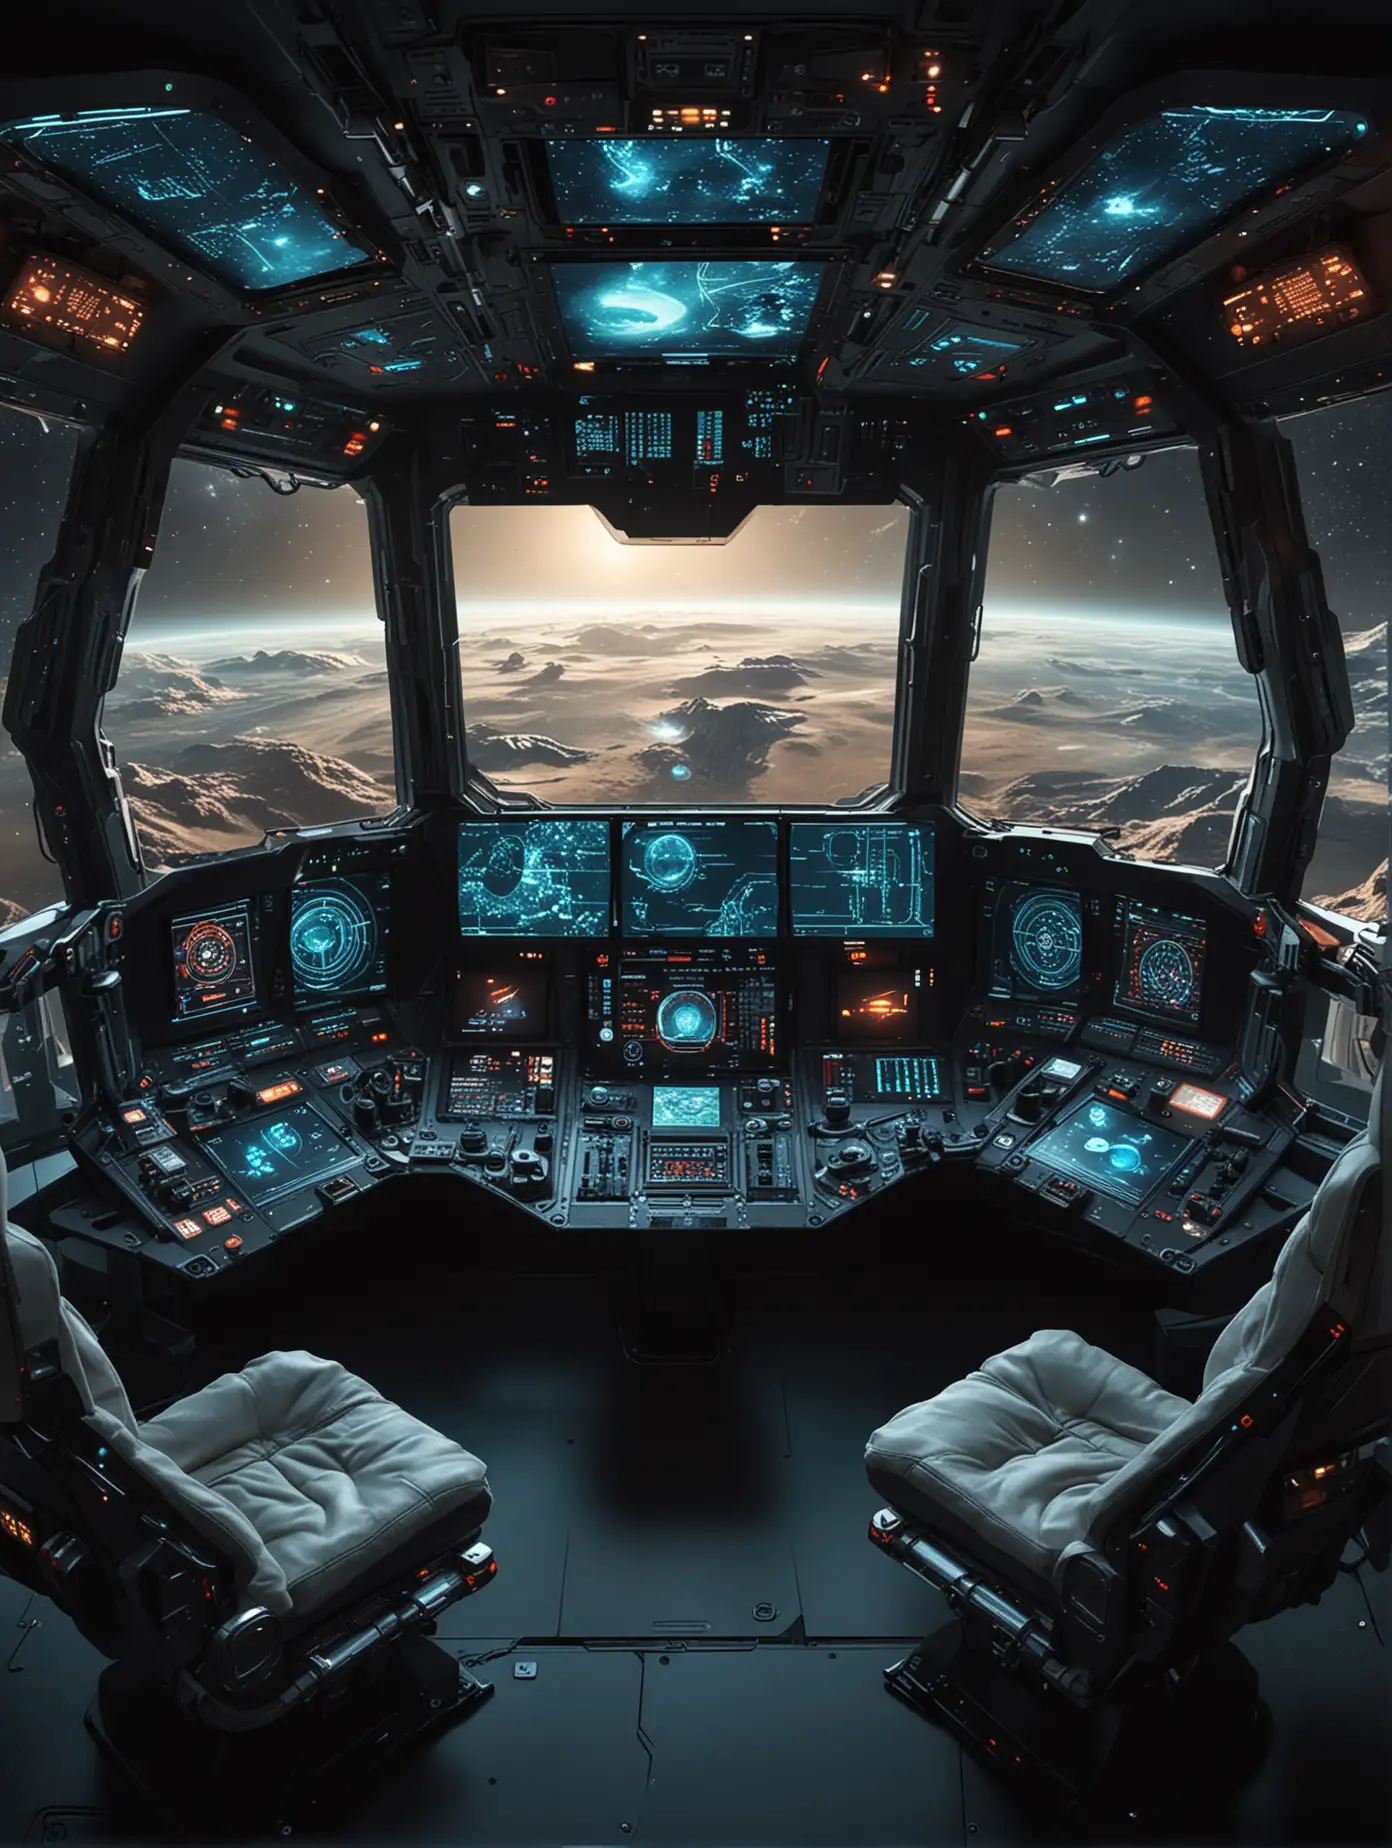 Futuristic-Spaceship-Cockpit-with-Command-Center-and-Holographic-Displays